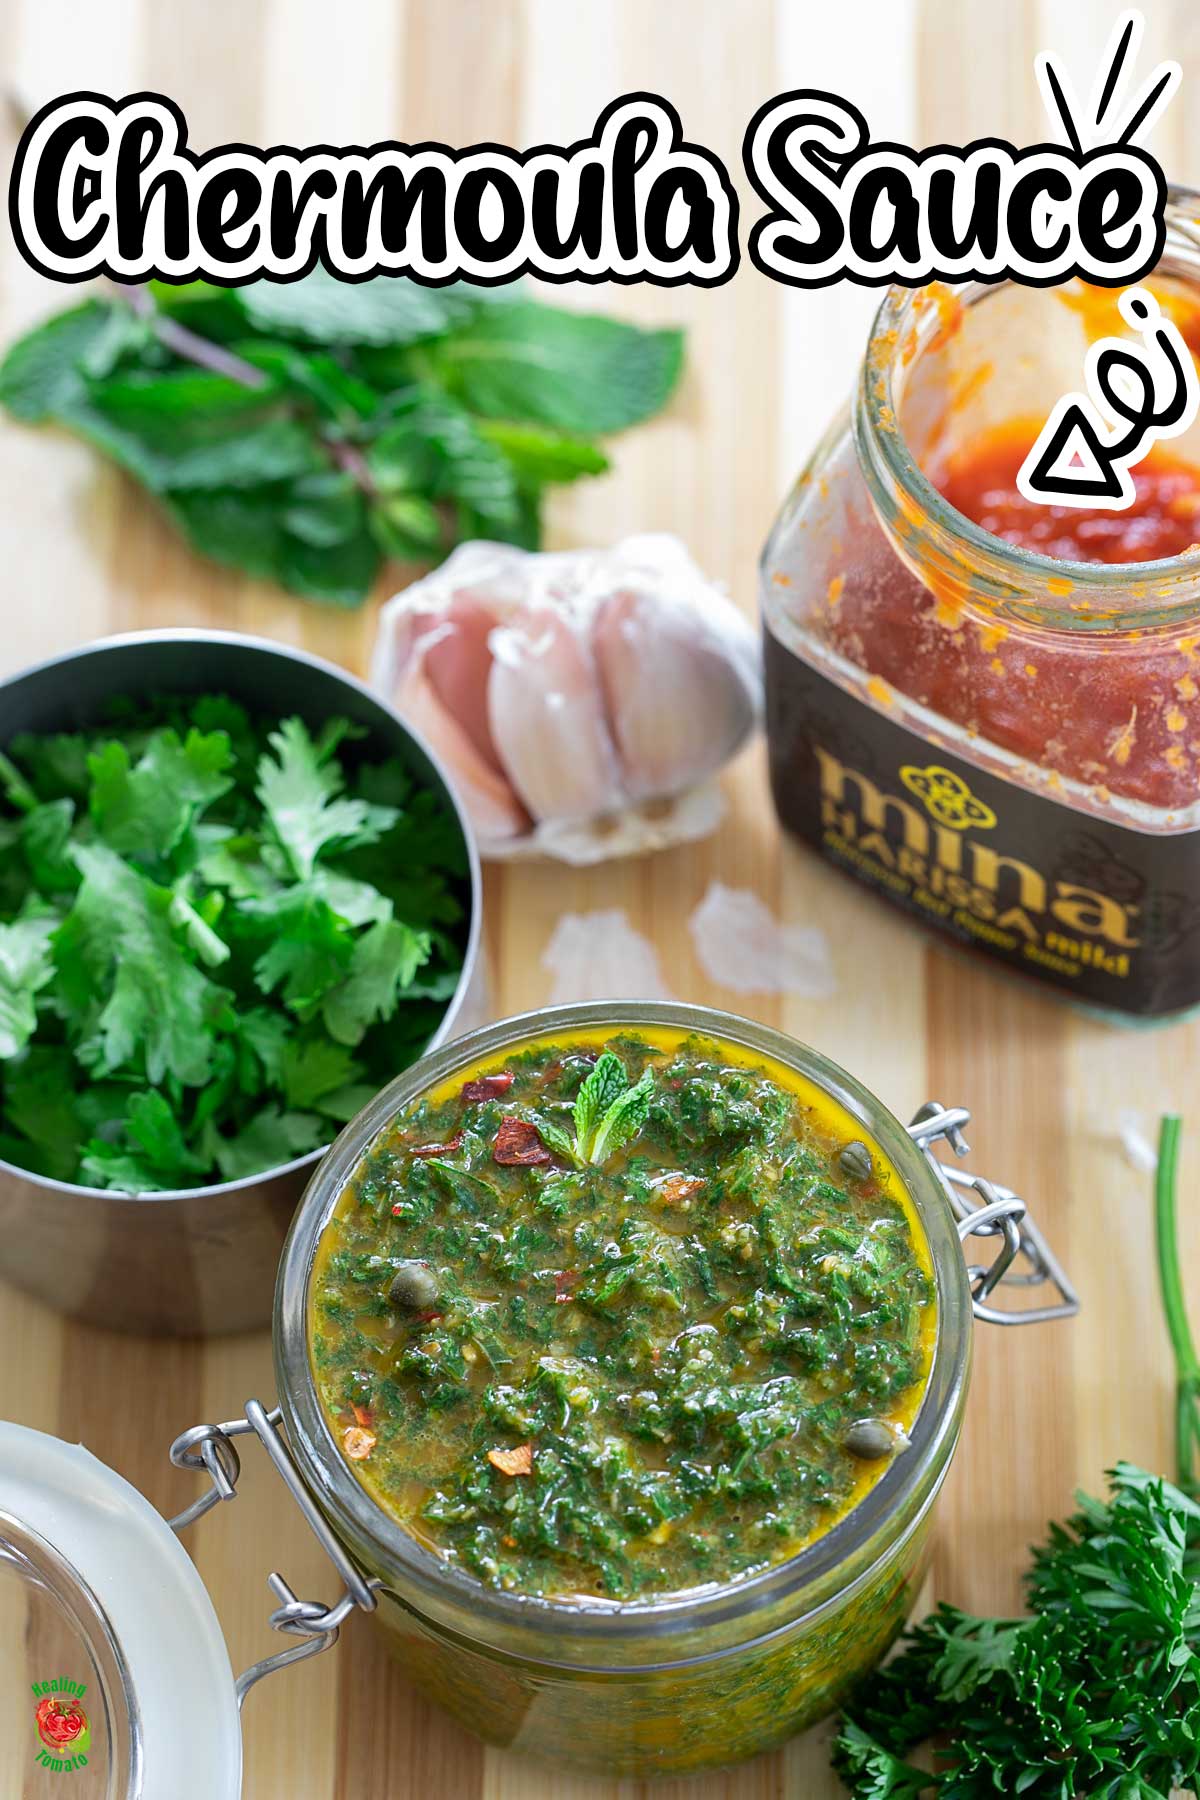 Top view of chermoula sauce in a glass jar. Jar is surrounded by fresh herbs, garlic and harissa paste.